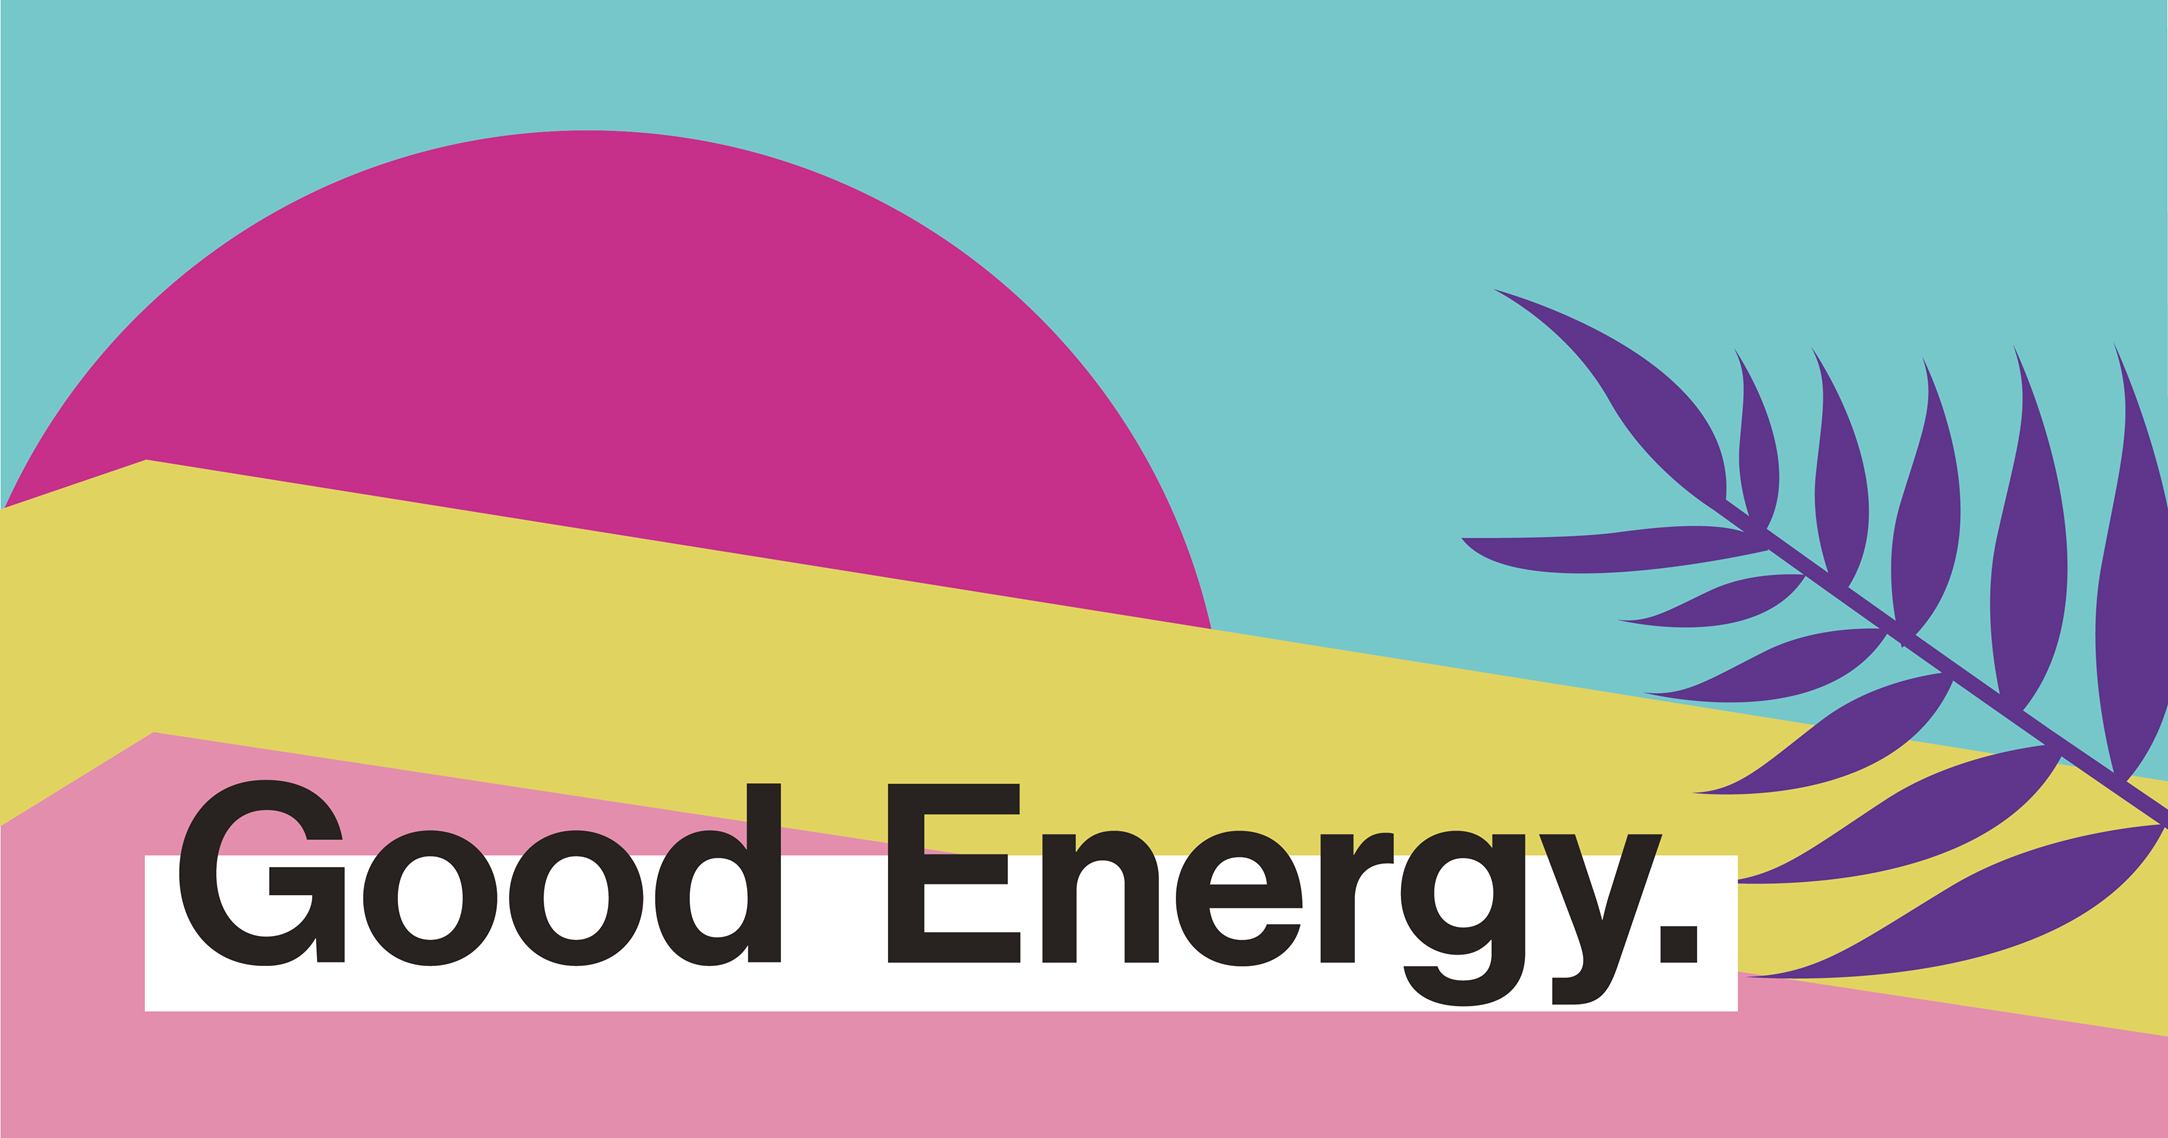 Good Energy: 8 simple ways to practice sustainable living